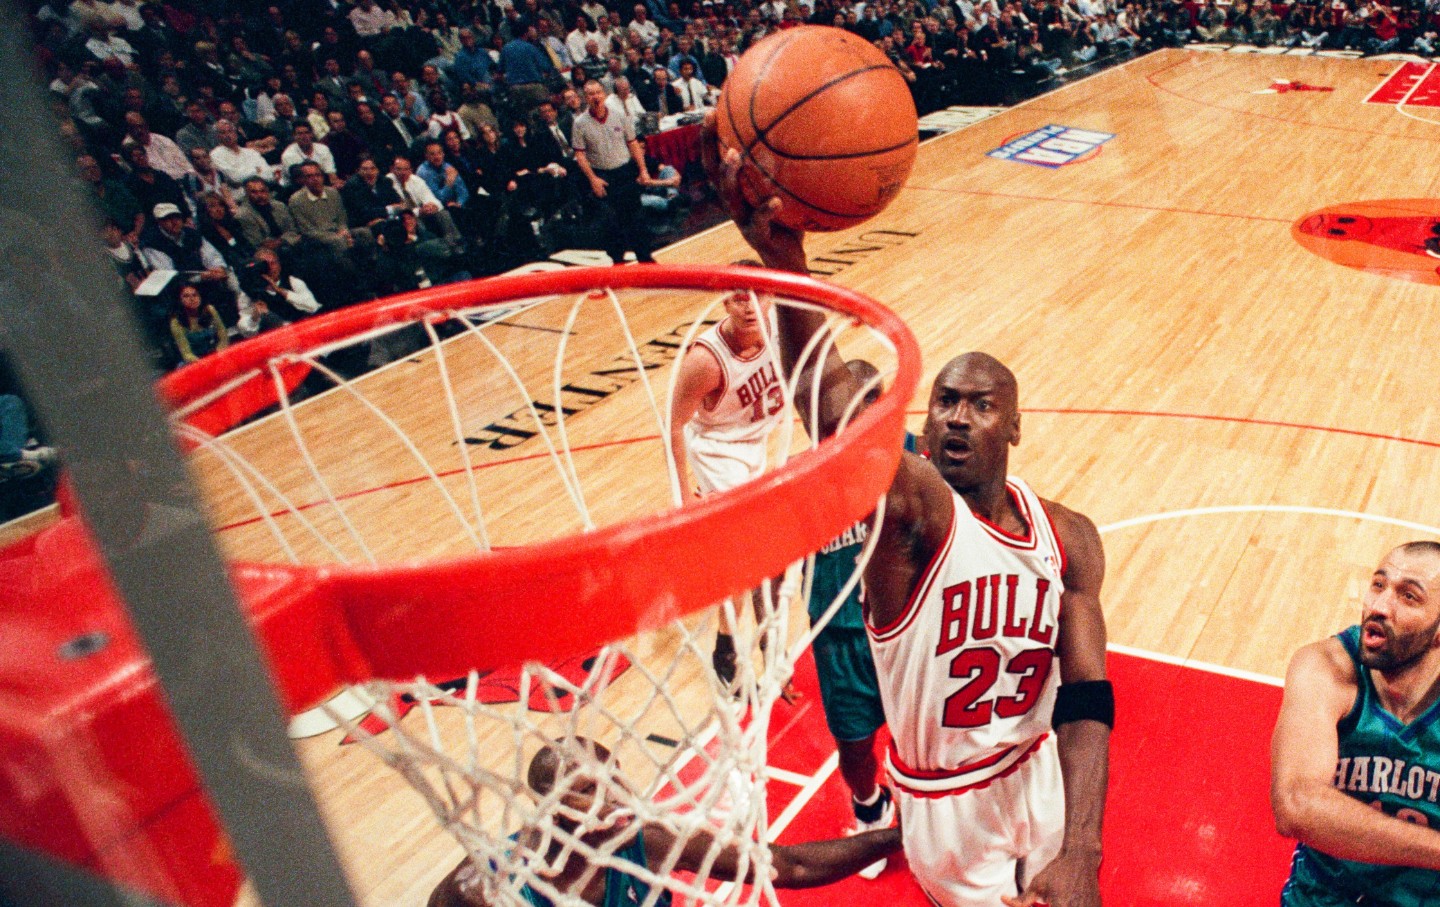 Chicago Bulls: Could Michael Jordan have played in MLB?